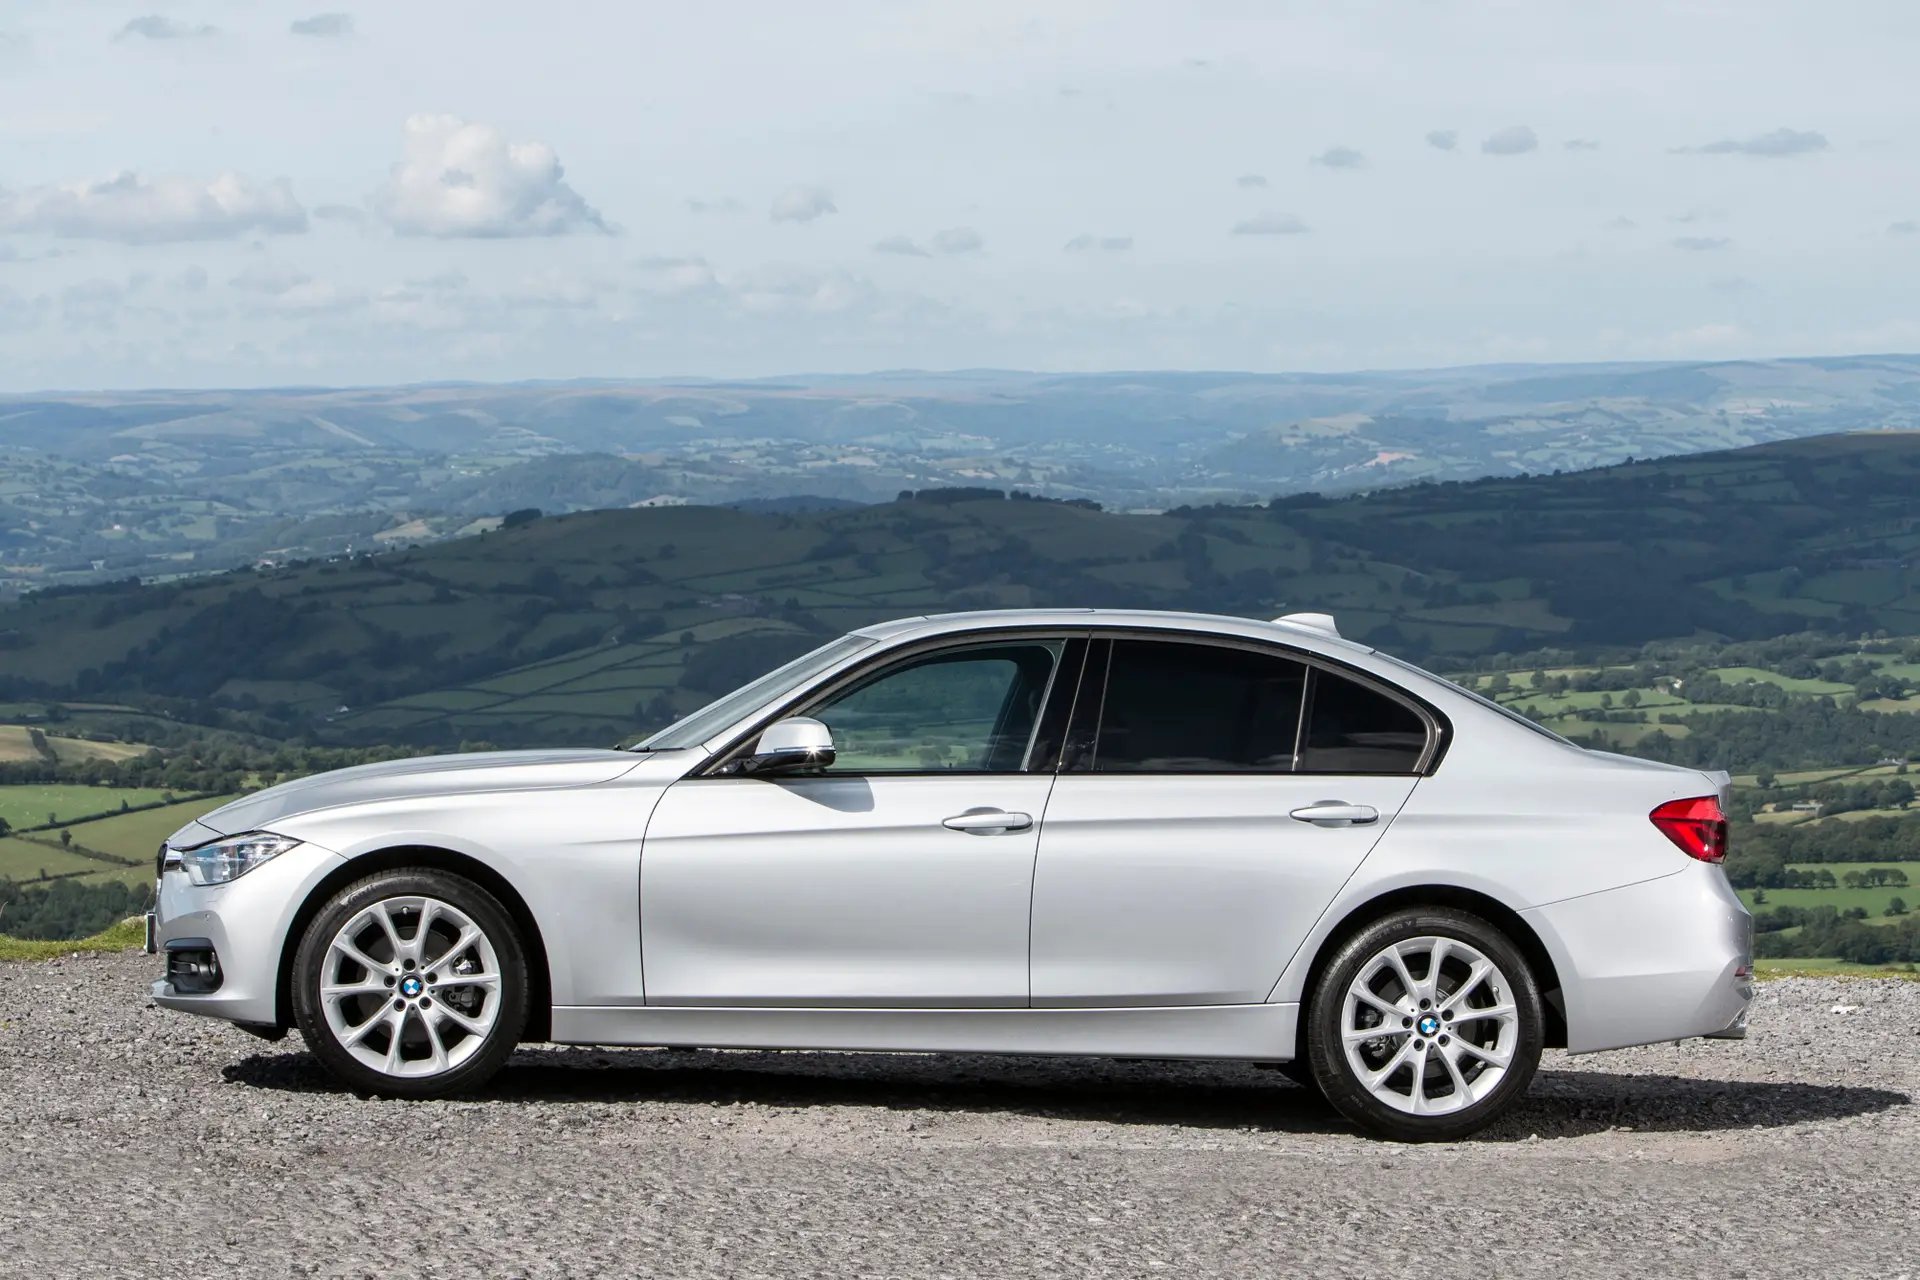 BMW 3 Series (2012-2018) Review: Exterior side photo of the BMW 3 Series